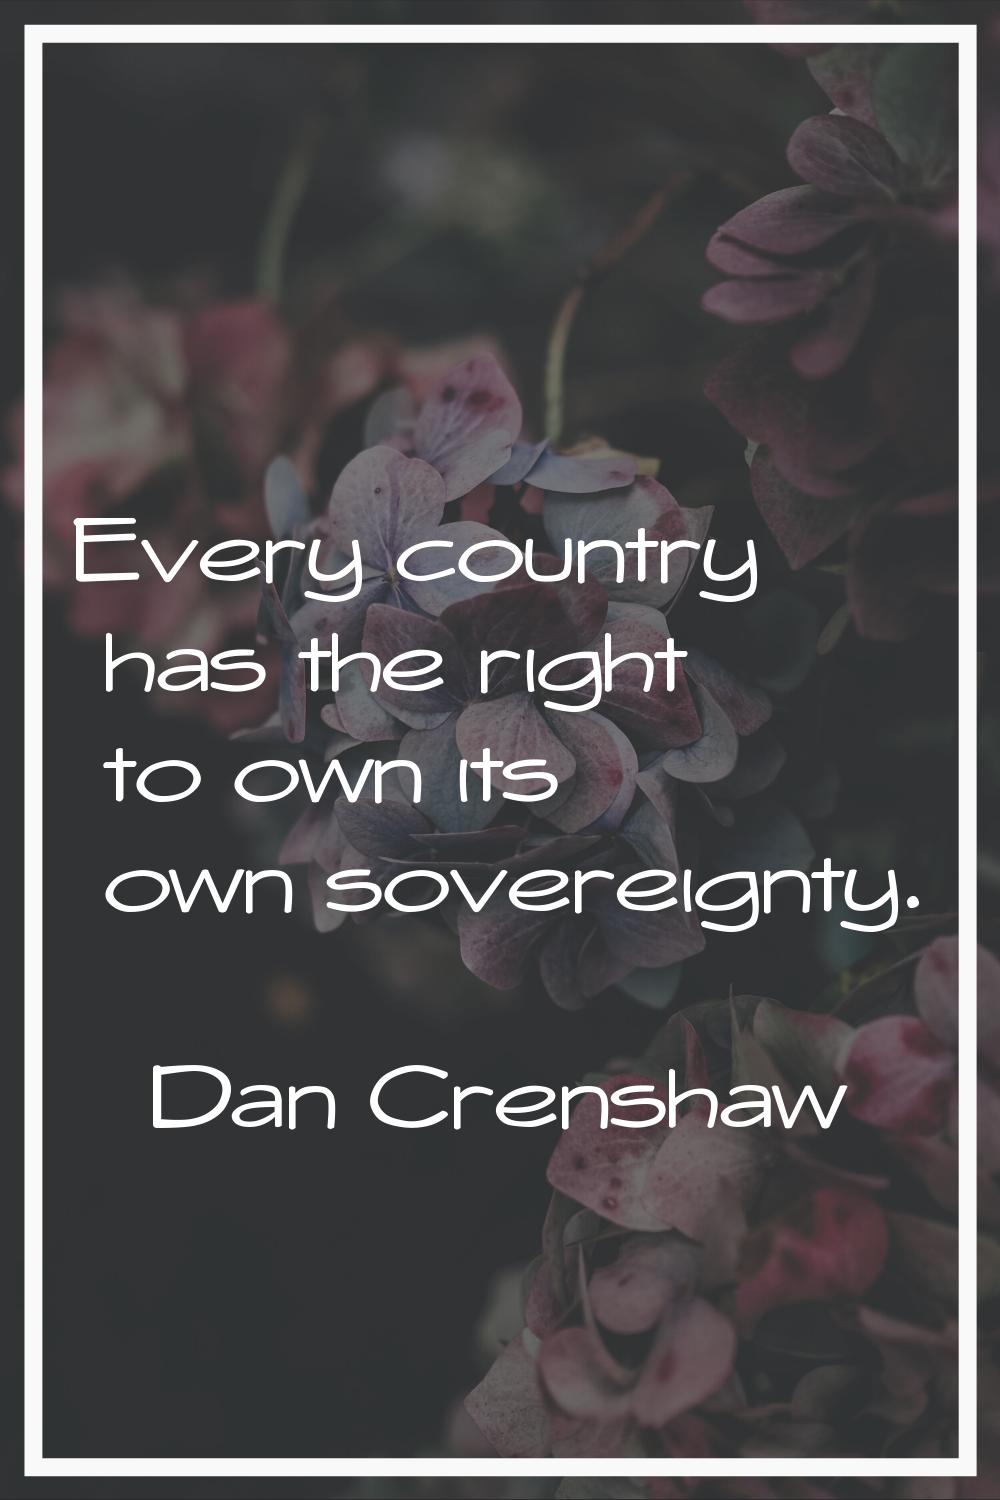 Every country has the right to own its own sovereignty.